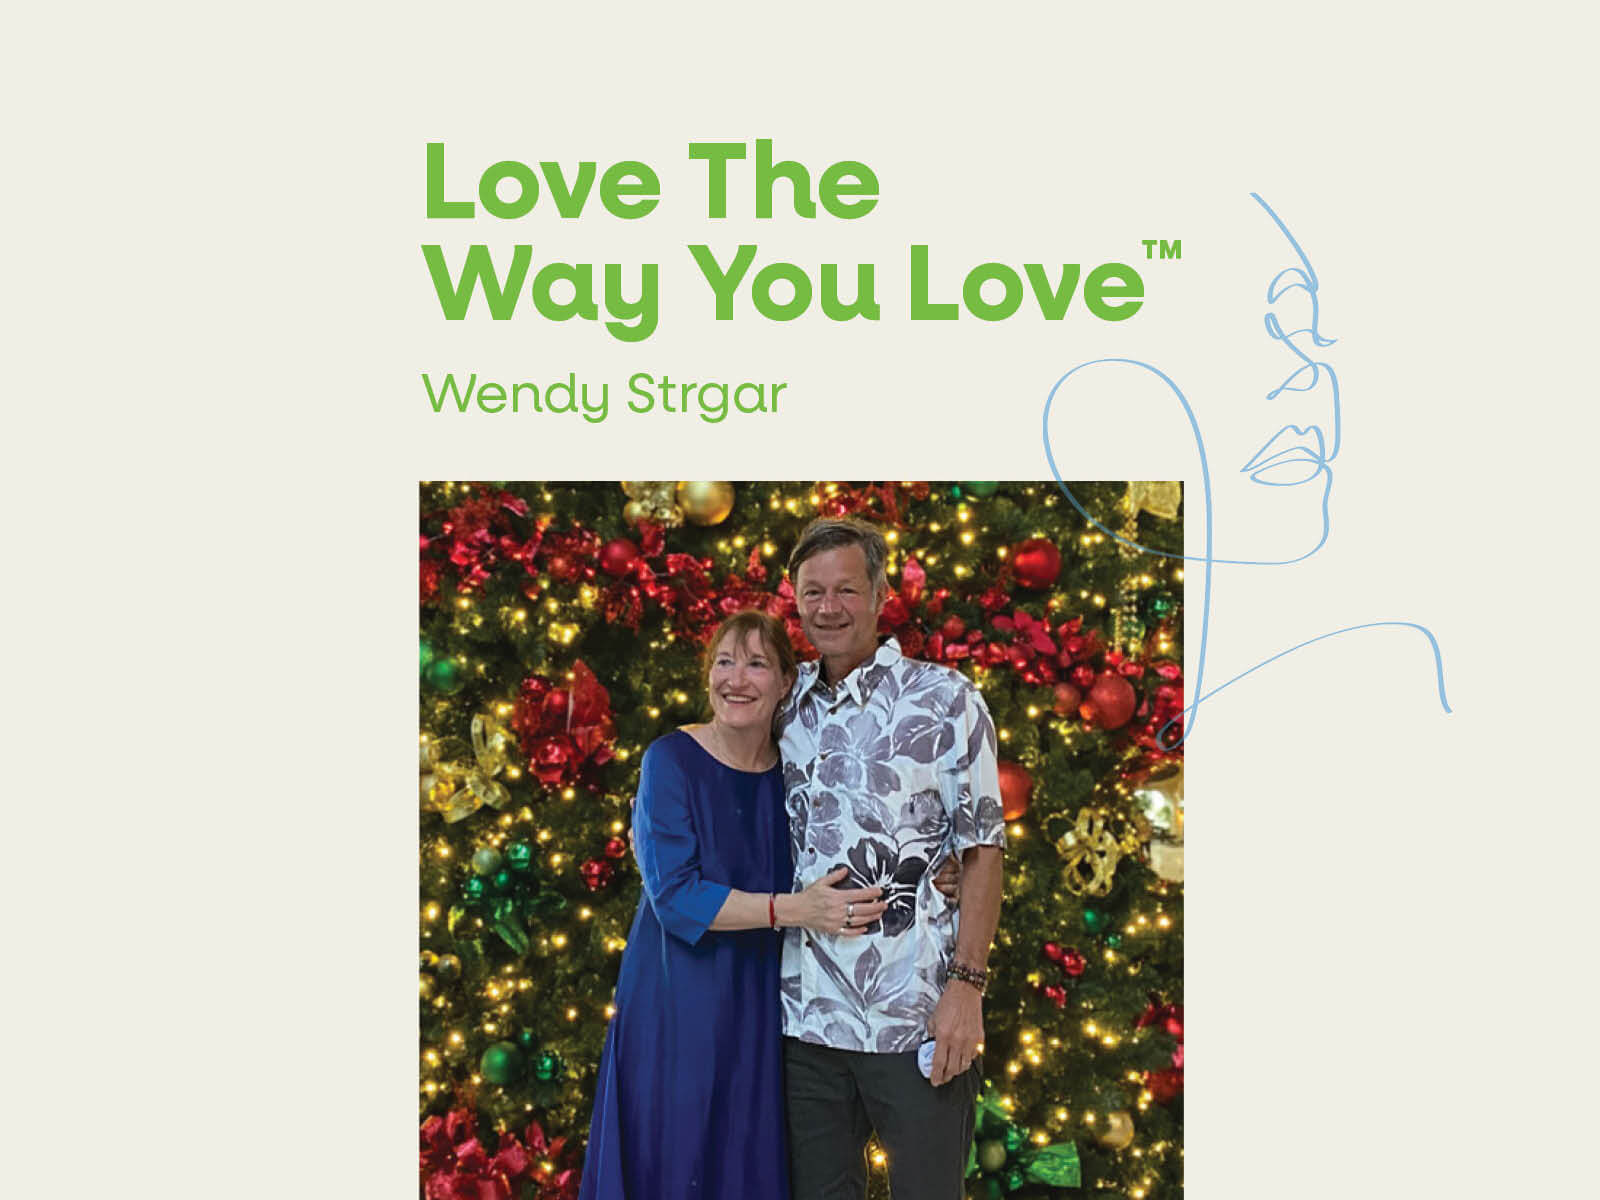 Introducing the “Love the Way You Love” Series